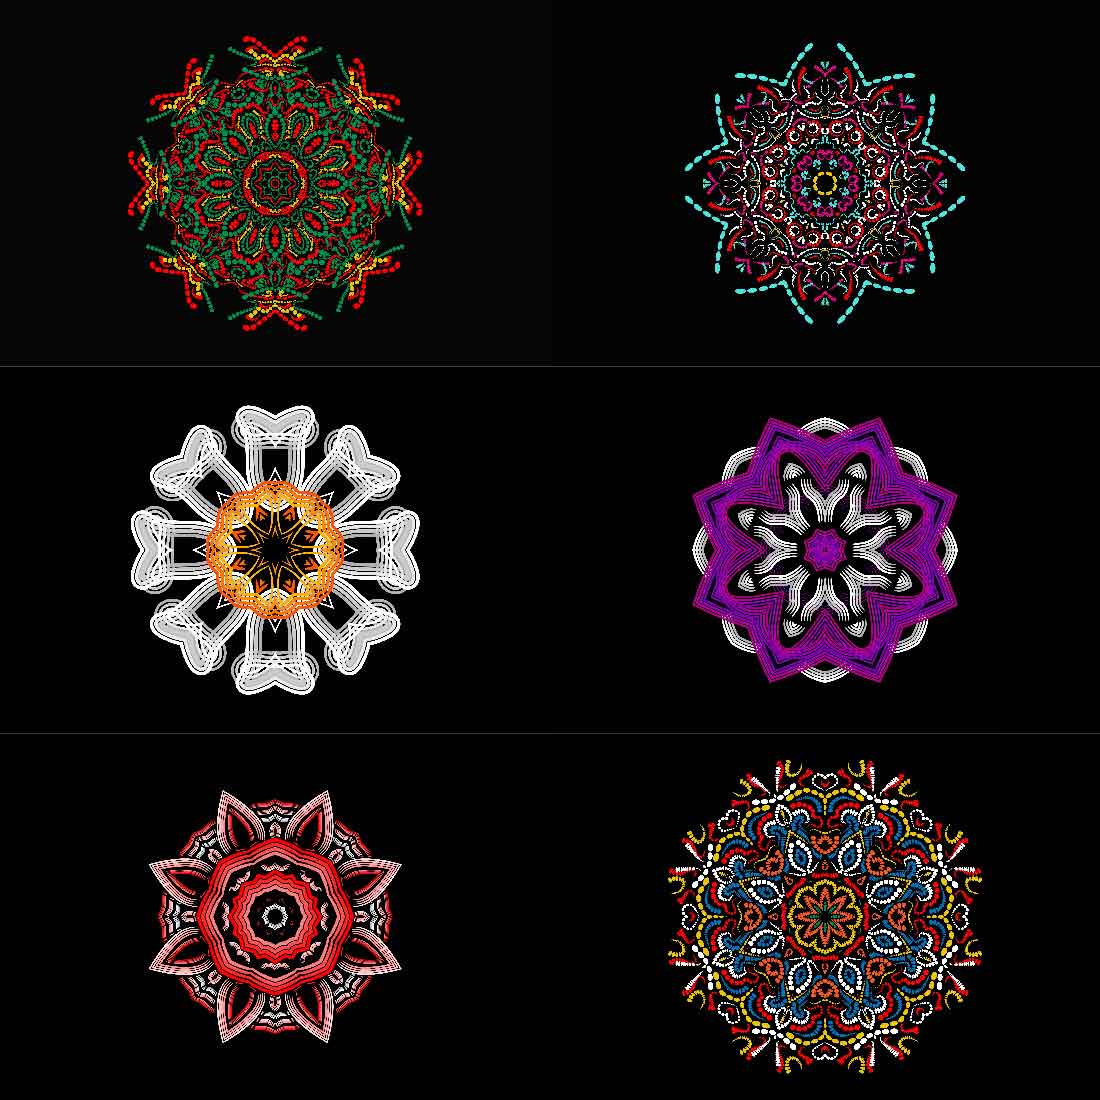 Collection of charming images of geometric mandalas